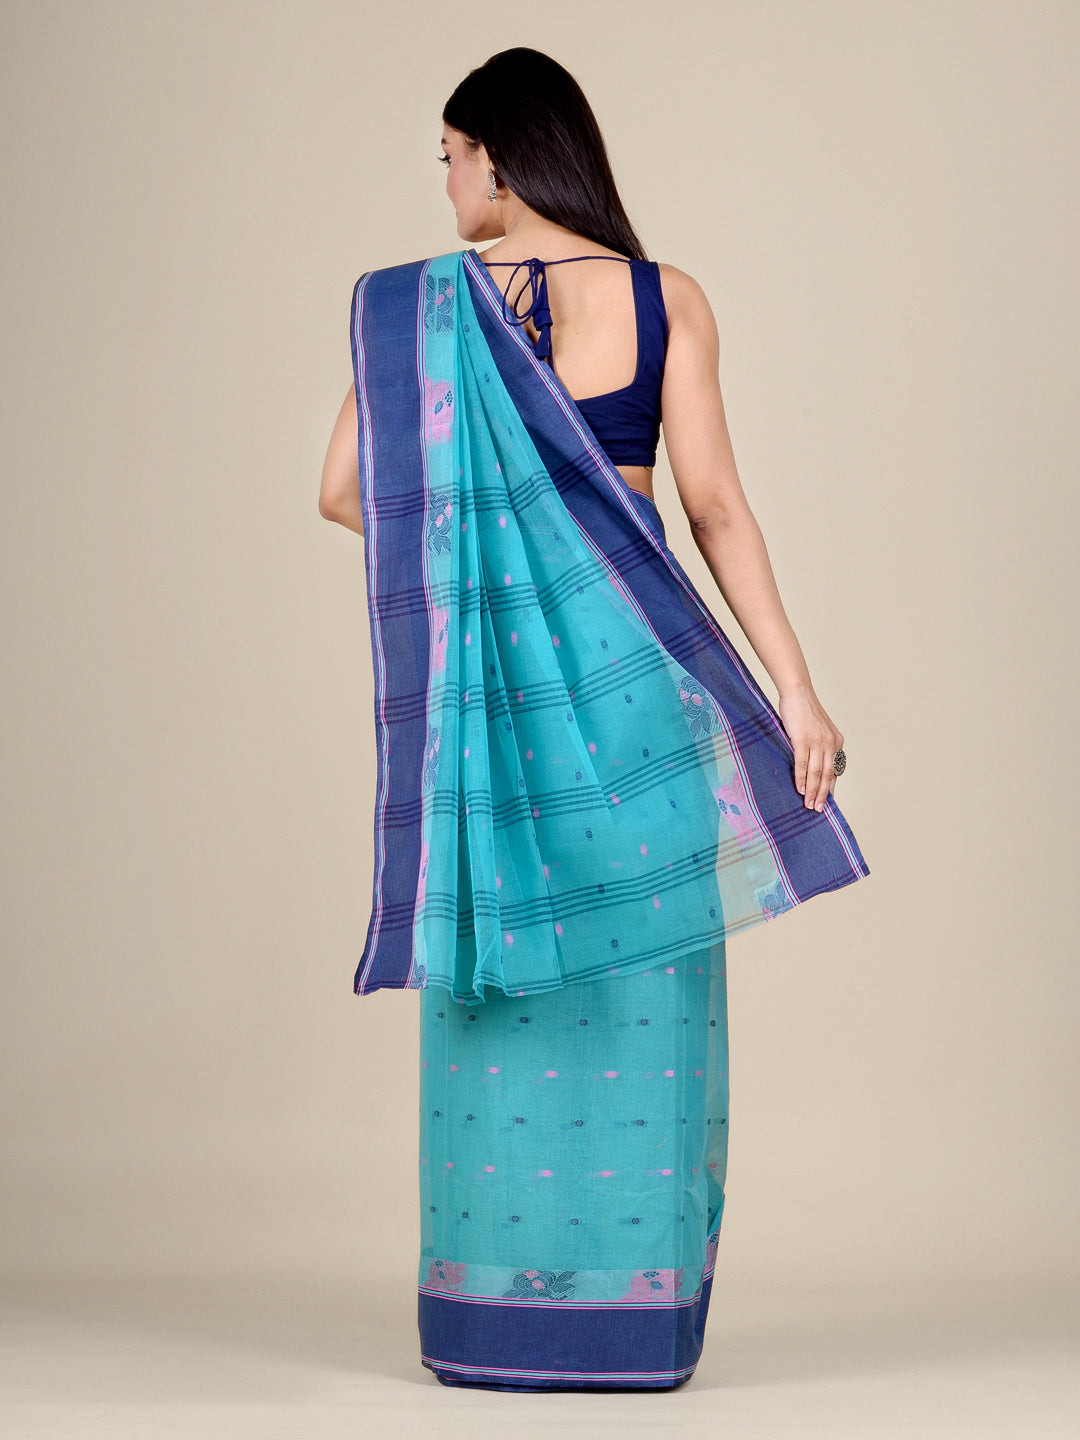 Women's Sky Blue Cotton Hand Woven Tant Saree With Navy Blue Border Without Blouse-Sajasajo